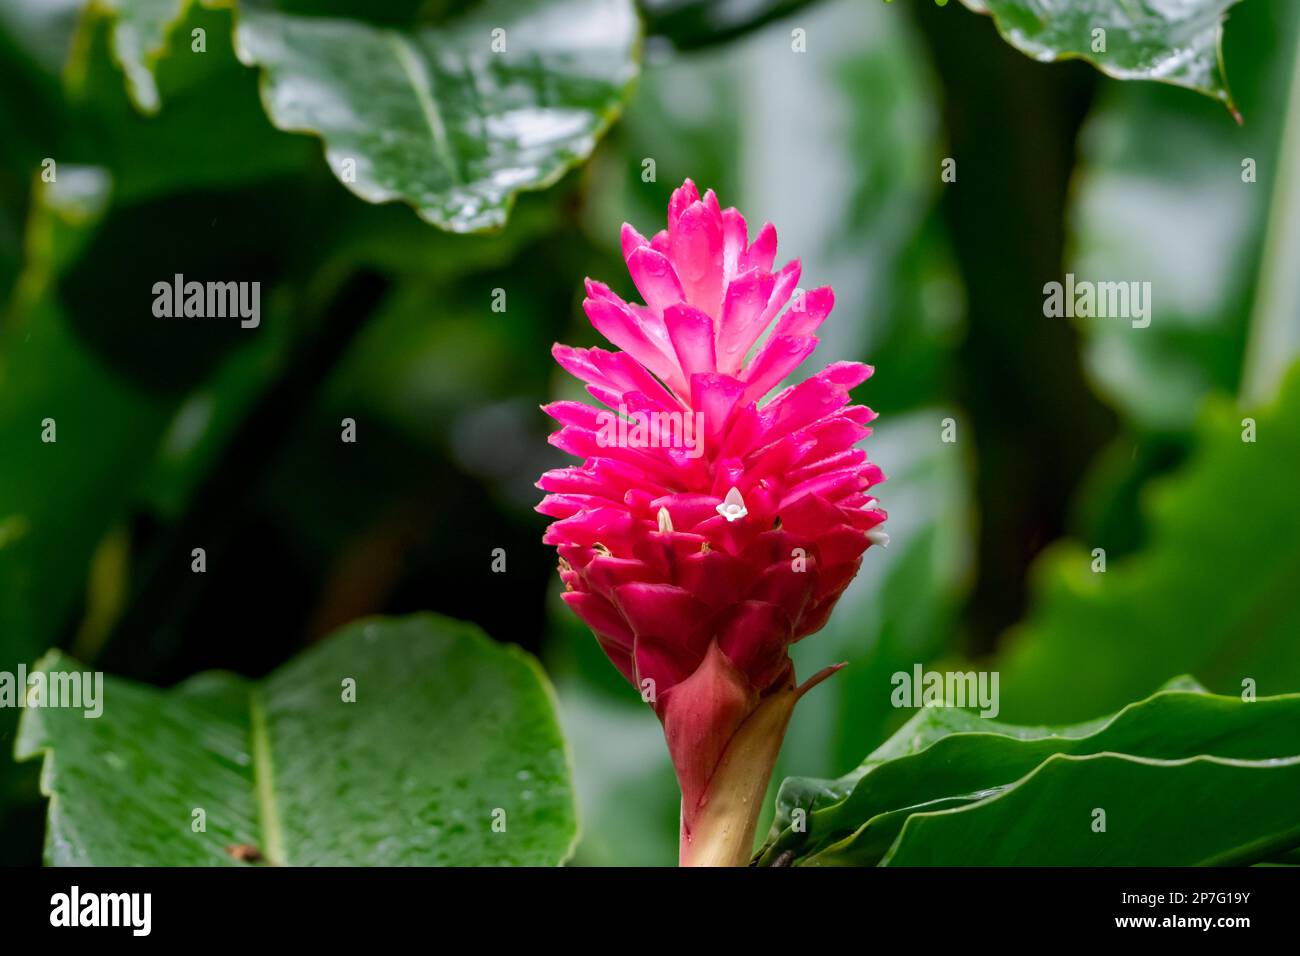 Closeup of tropical, pink ginger lily flower surrounded by green leaves. Stock Photo